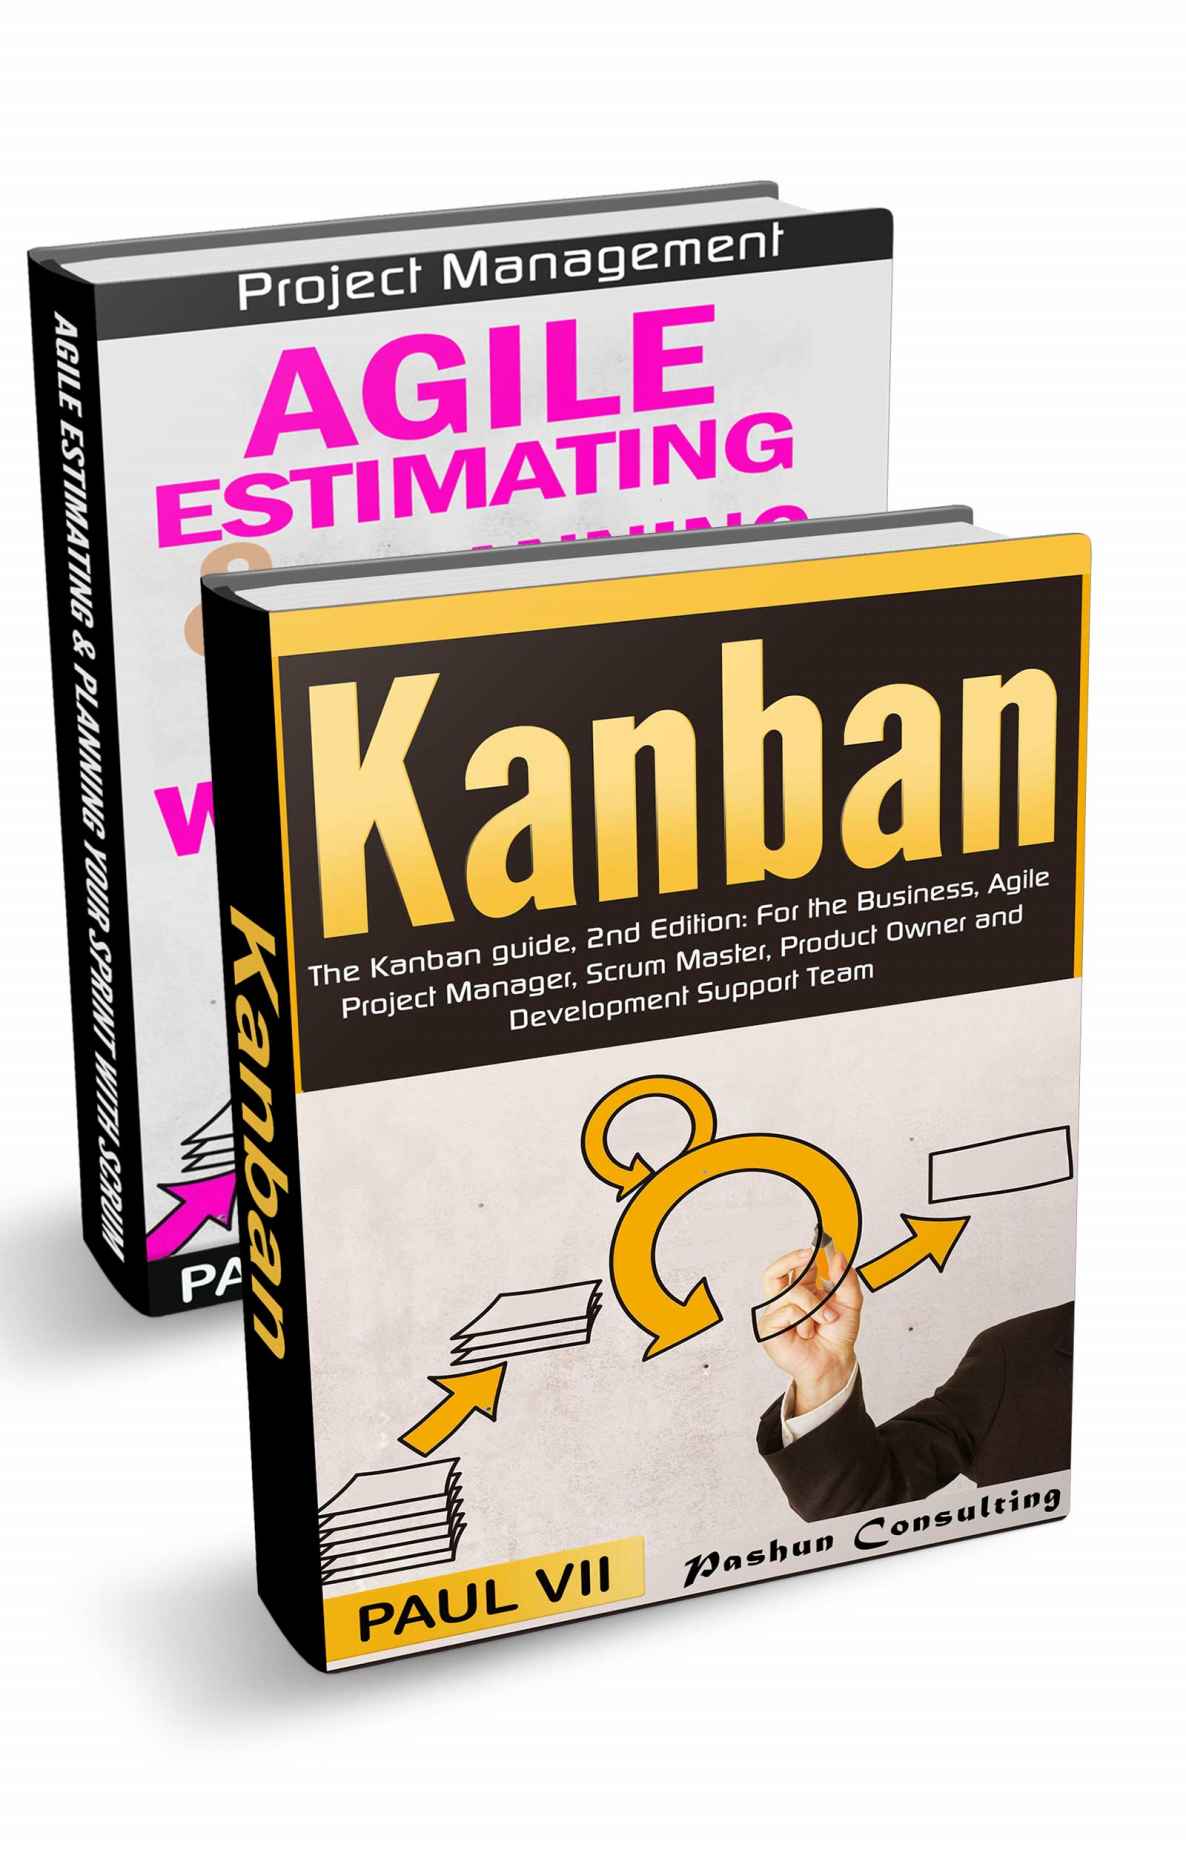 Agile Product Management: (Box Set) : Agile Estimating & Planning Your Sprint with Scrum & Kanban: The Kanban guide, 2nd Edition